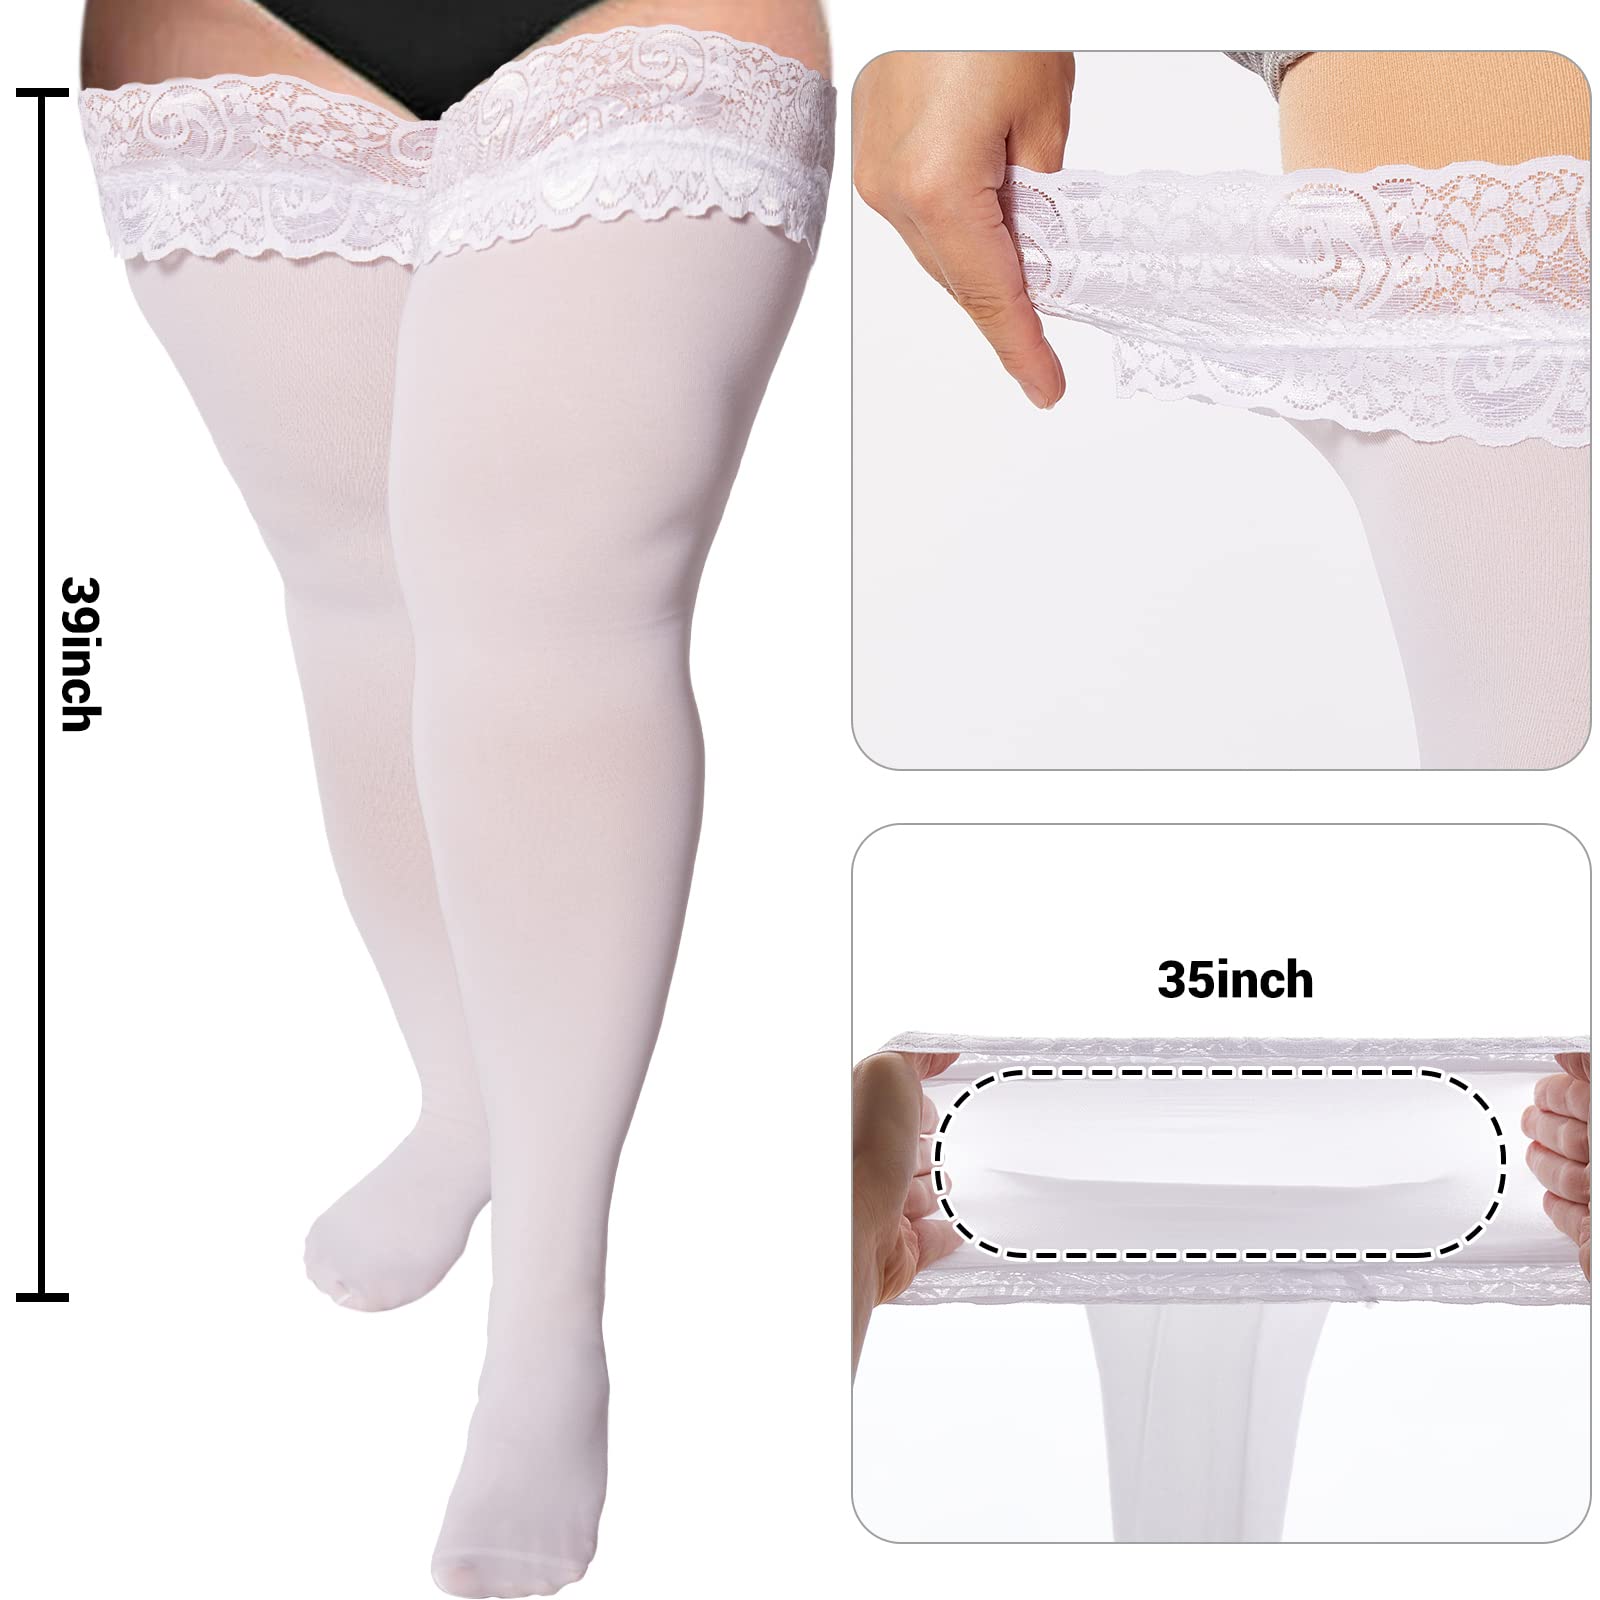 55D Semi Sheer Silicone Lace Stay Up Thigh Highs Pantyhose-White - Moon Wood